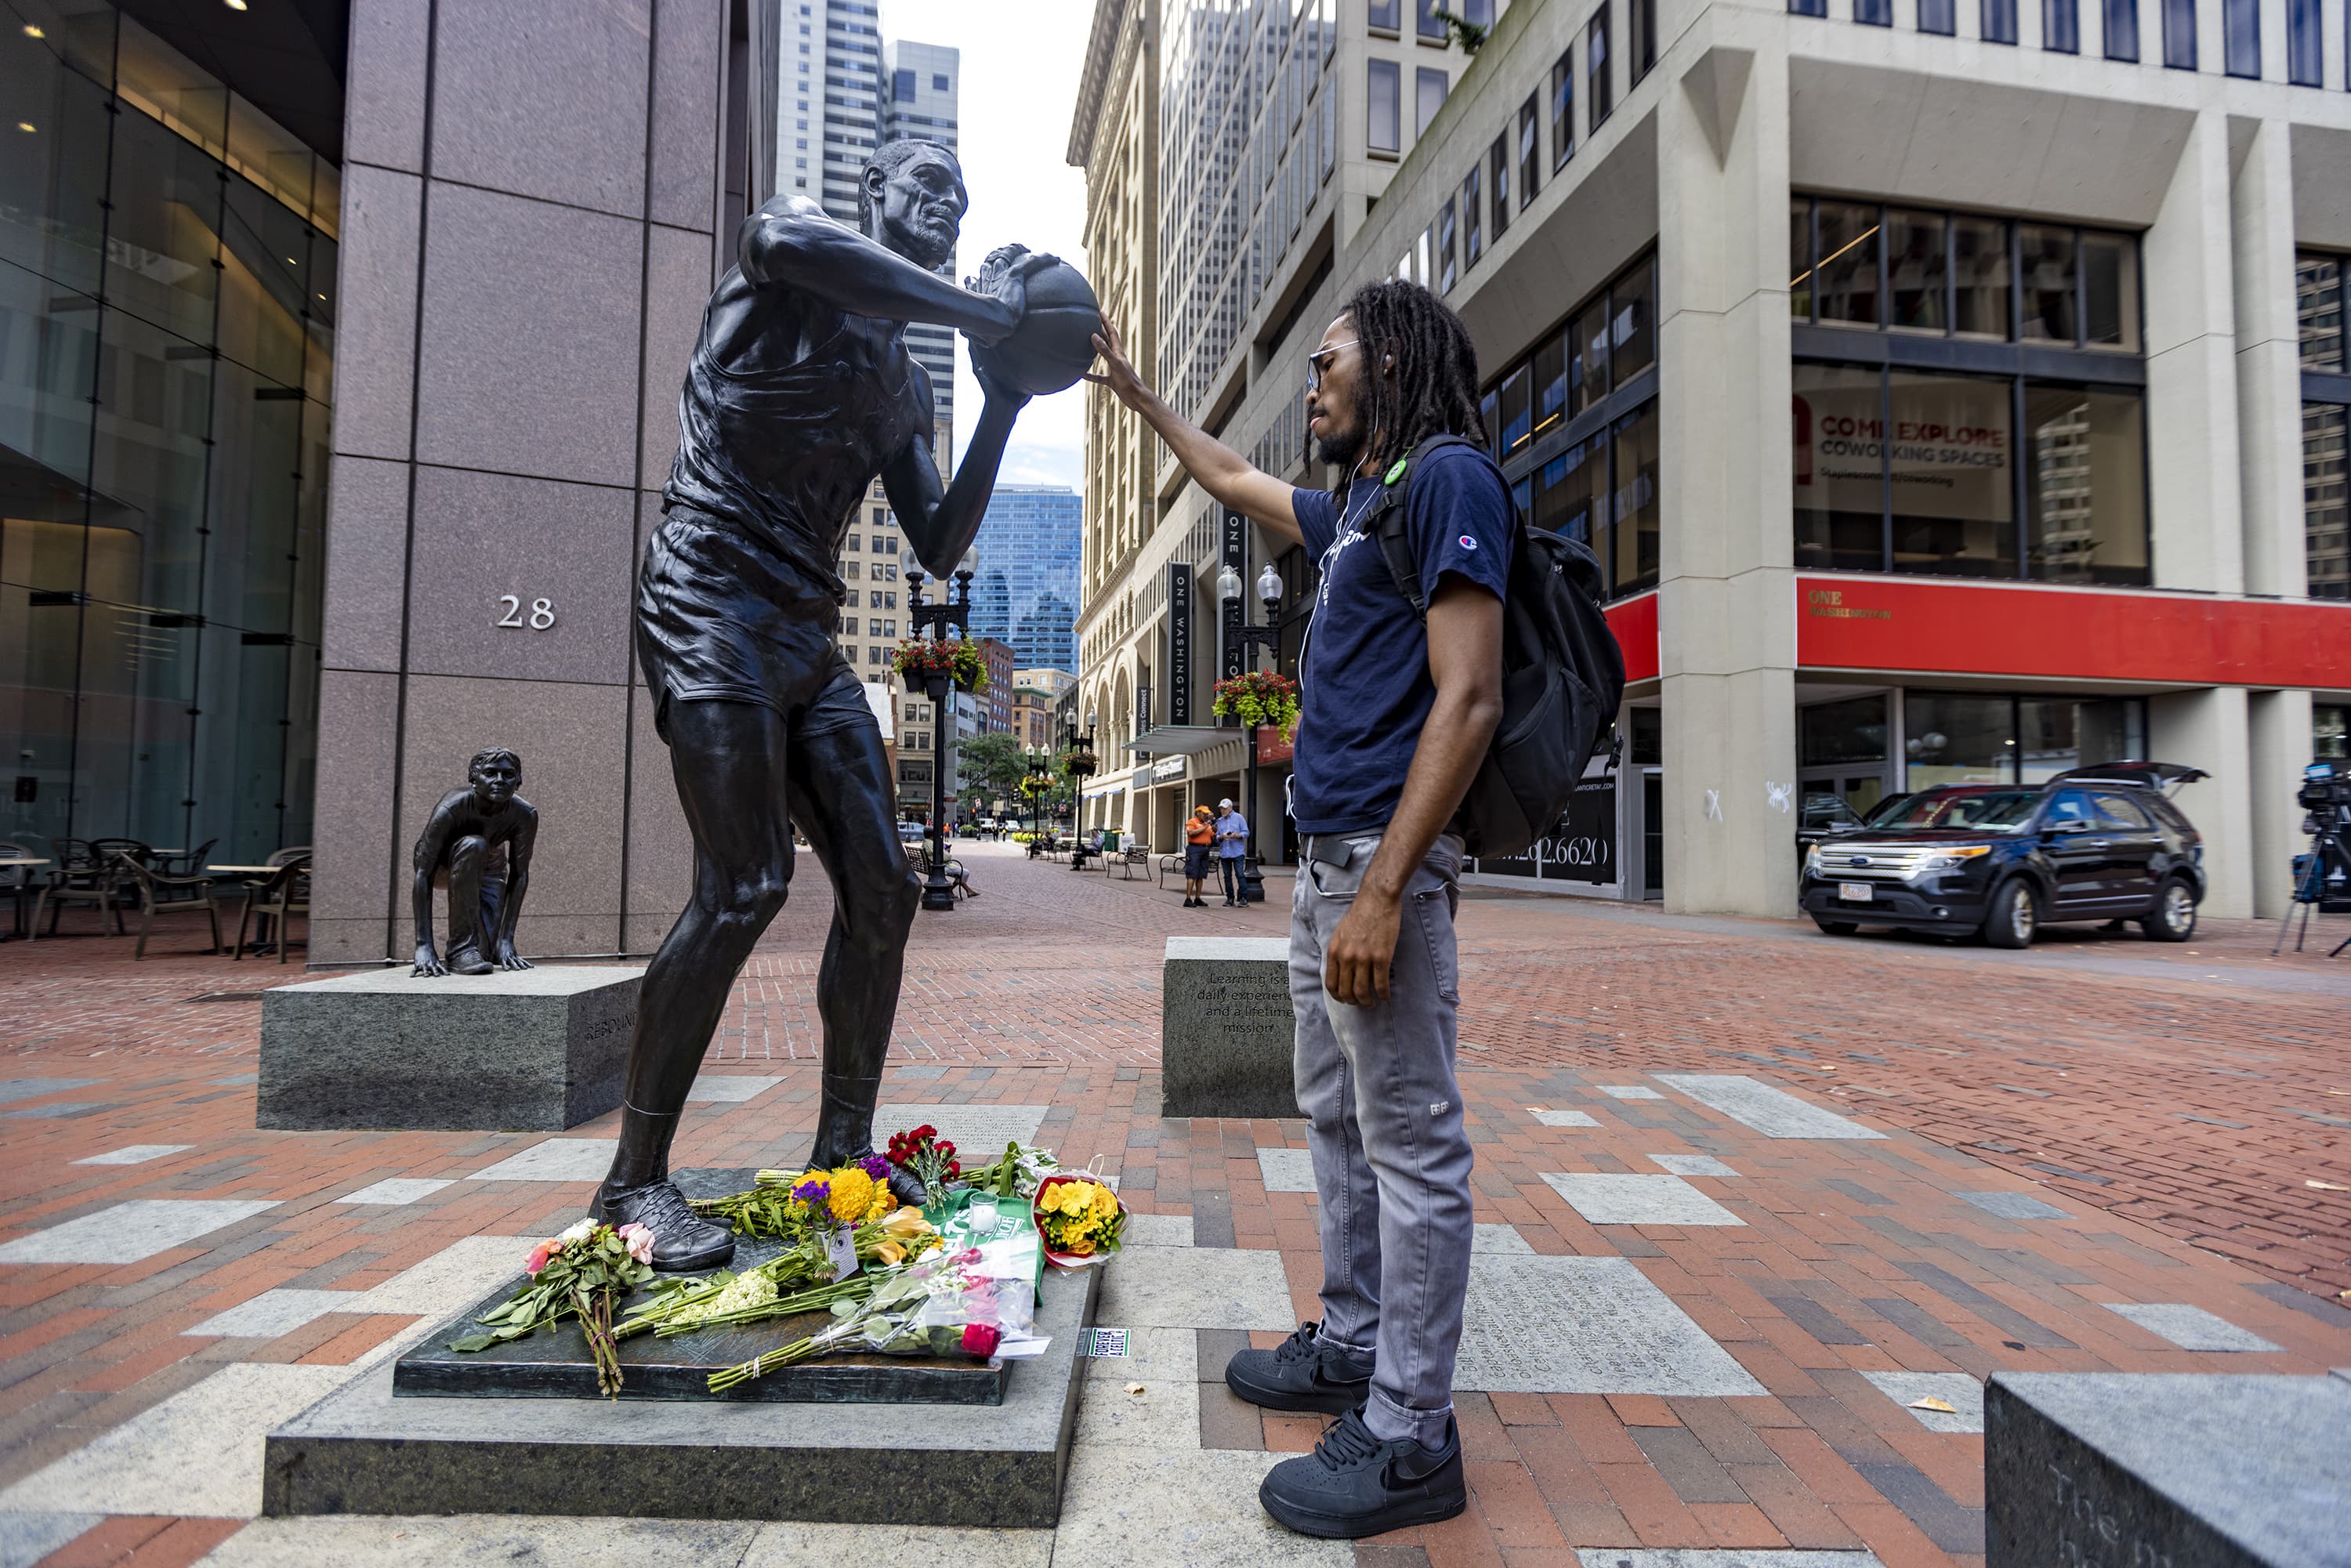 Neil Lamber touches the ball on the Bill Russell statue at City Hall Plaza in Boston. (Jesse Costa/WBUR)